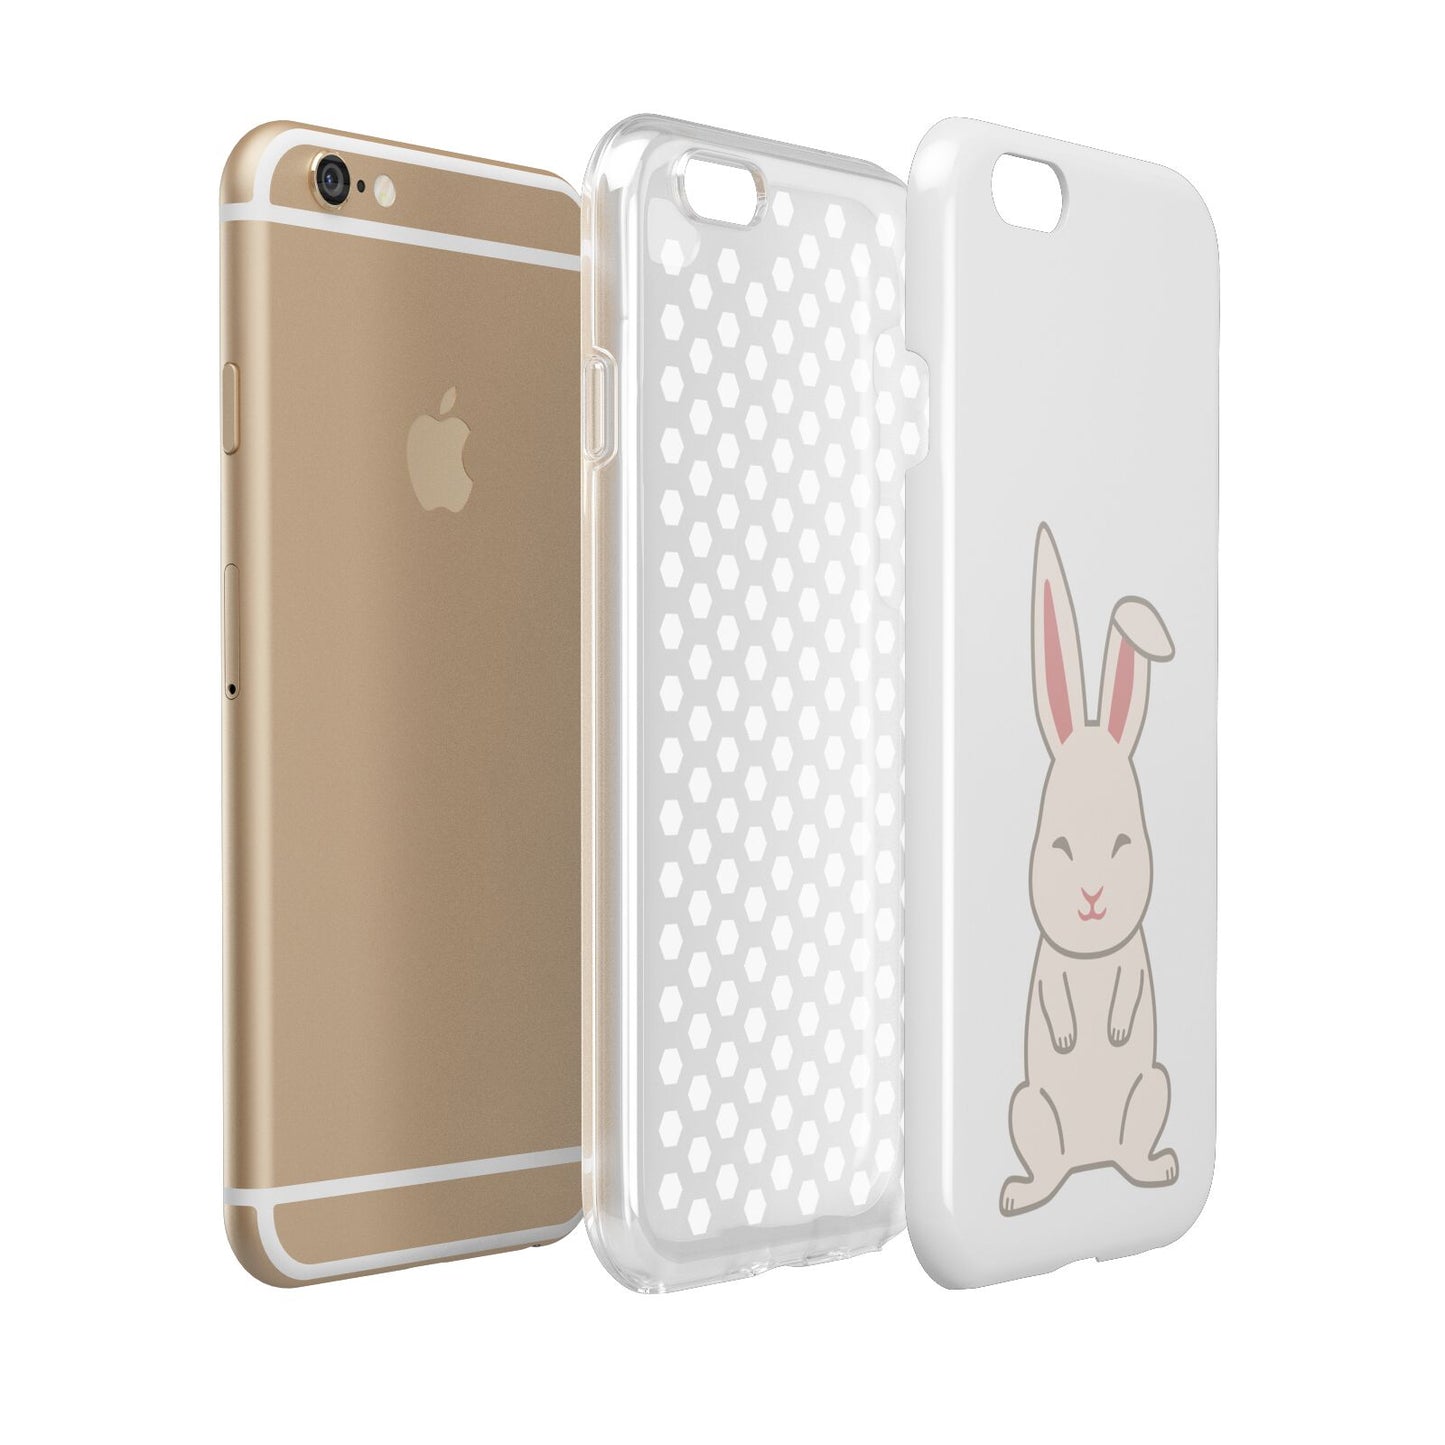 Bunny Apple iPhone 6 3D Tough Case Expanded view